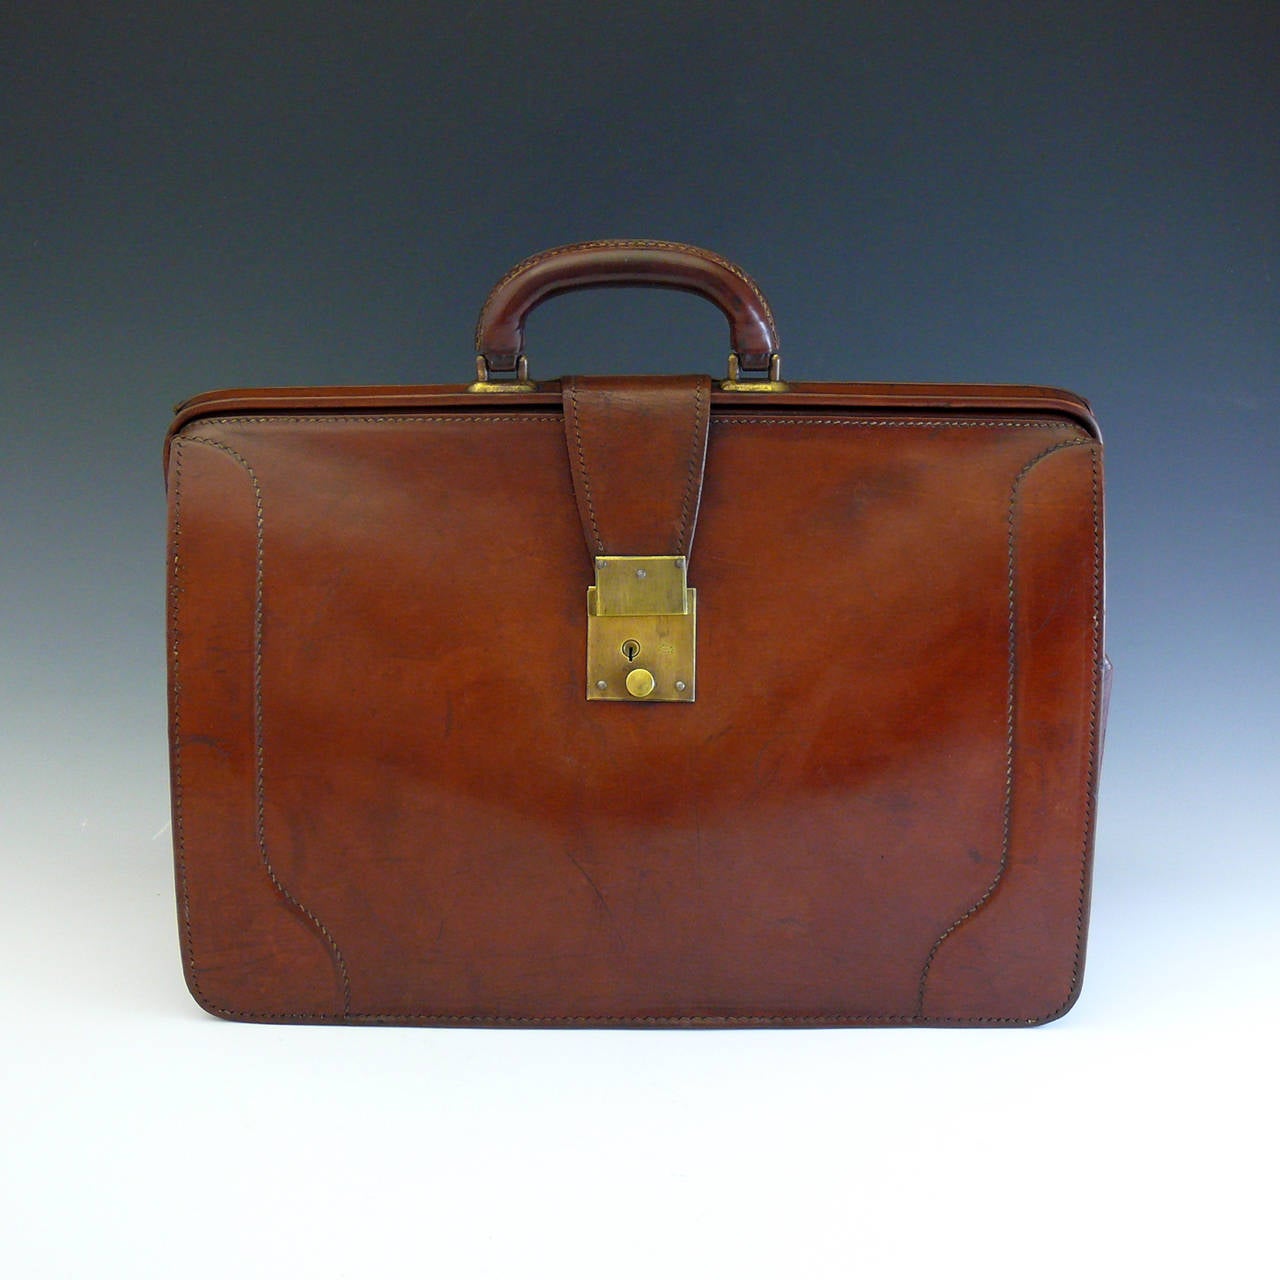 Lovely 'A-Frame' Case by Pendragon made from sturdy leather with original tattersall lining and brass lock. Circa 1955.

Dimensions: 44.5 cm x 30.5 cm x 19 cm